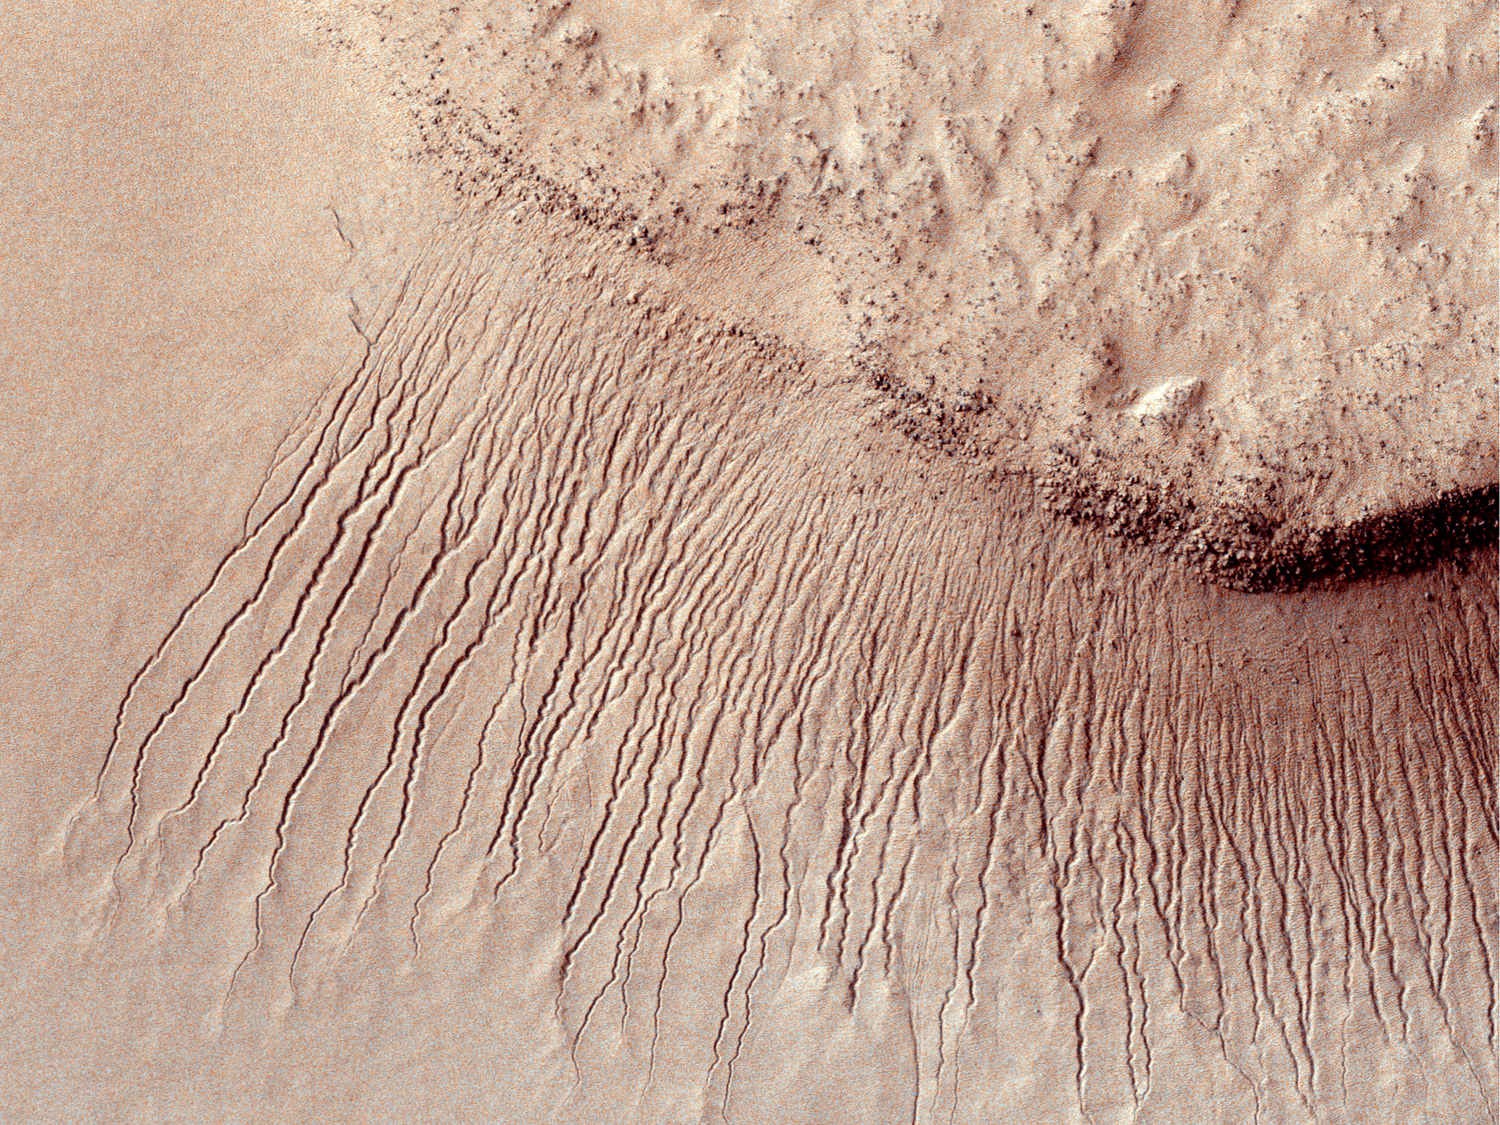 Images like this from the High Resolution Imaging Science Experiment (HiRISE) camera on NASA's Mars Reconnaissance Orbiter show portions of the Martian surface in unprecedented detail. This one shows many channels from 1 meter to 10 meters (approximately 3 feet to 33 feet) wide on a scarp in the Hellas impact basin.